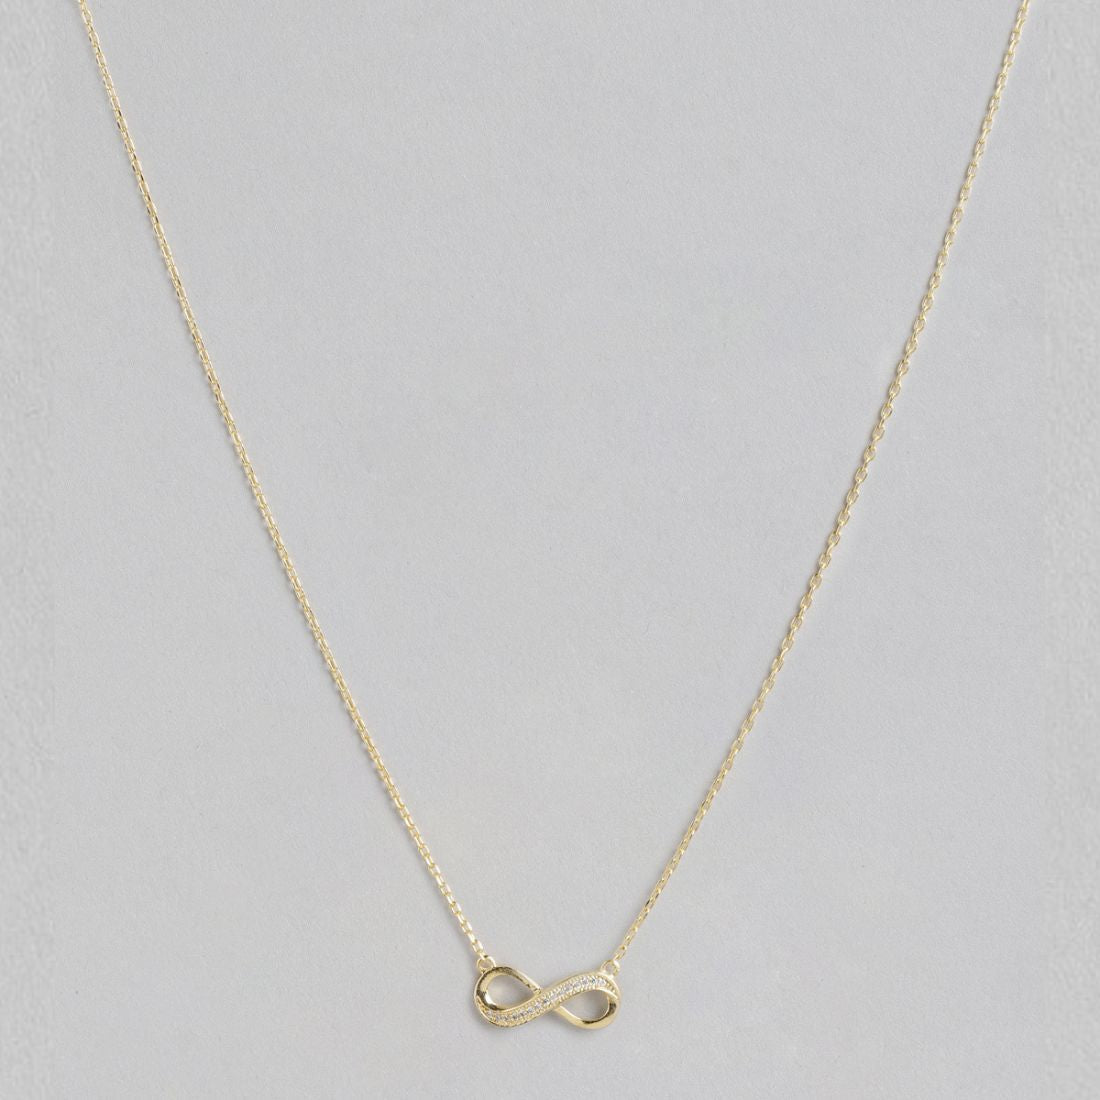 Infinite Love Embodied Gold-Plated Cubic Zirconia 925 Sterling Silver Necklace